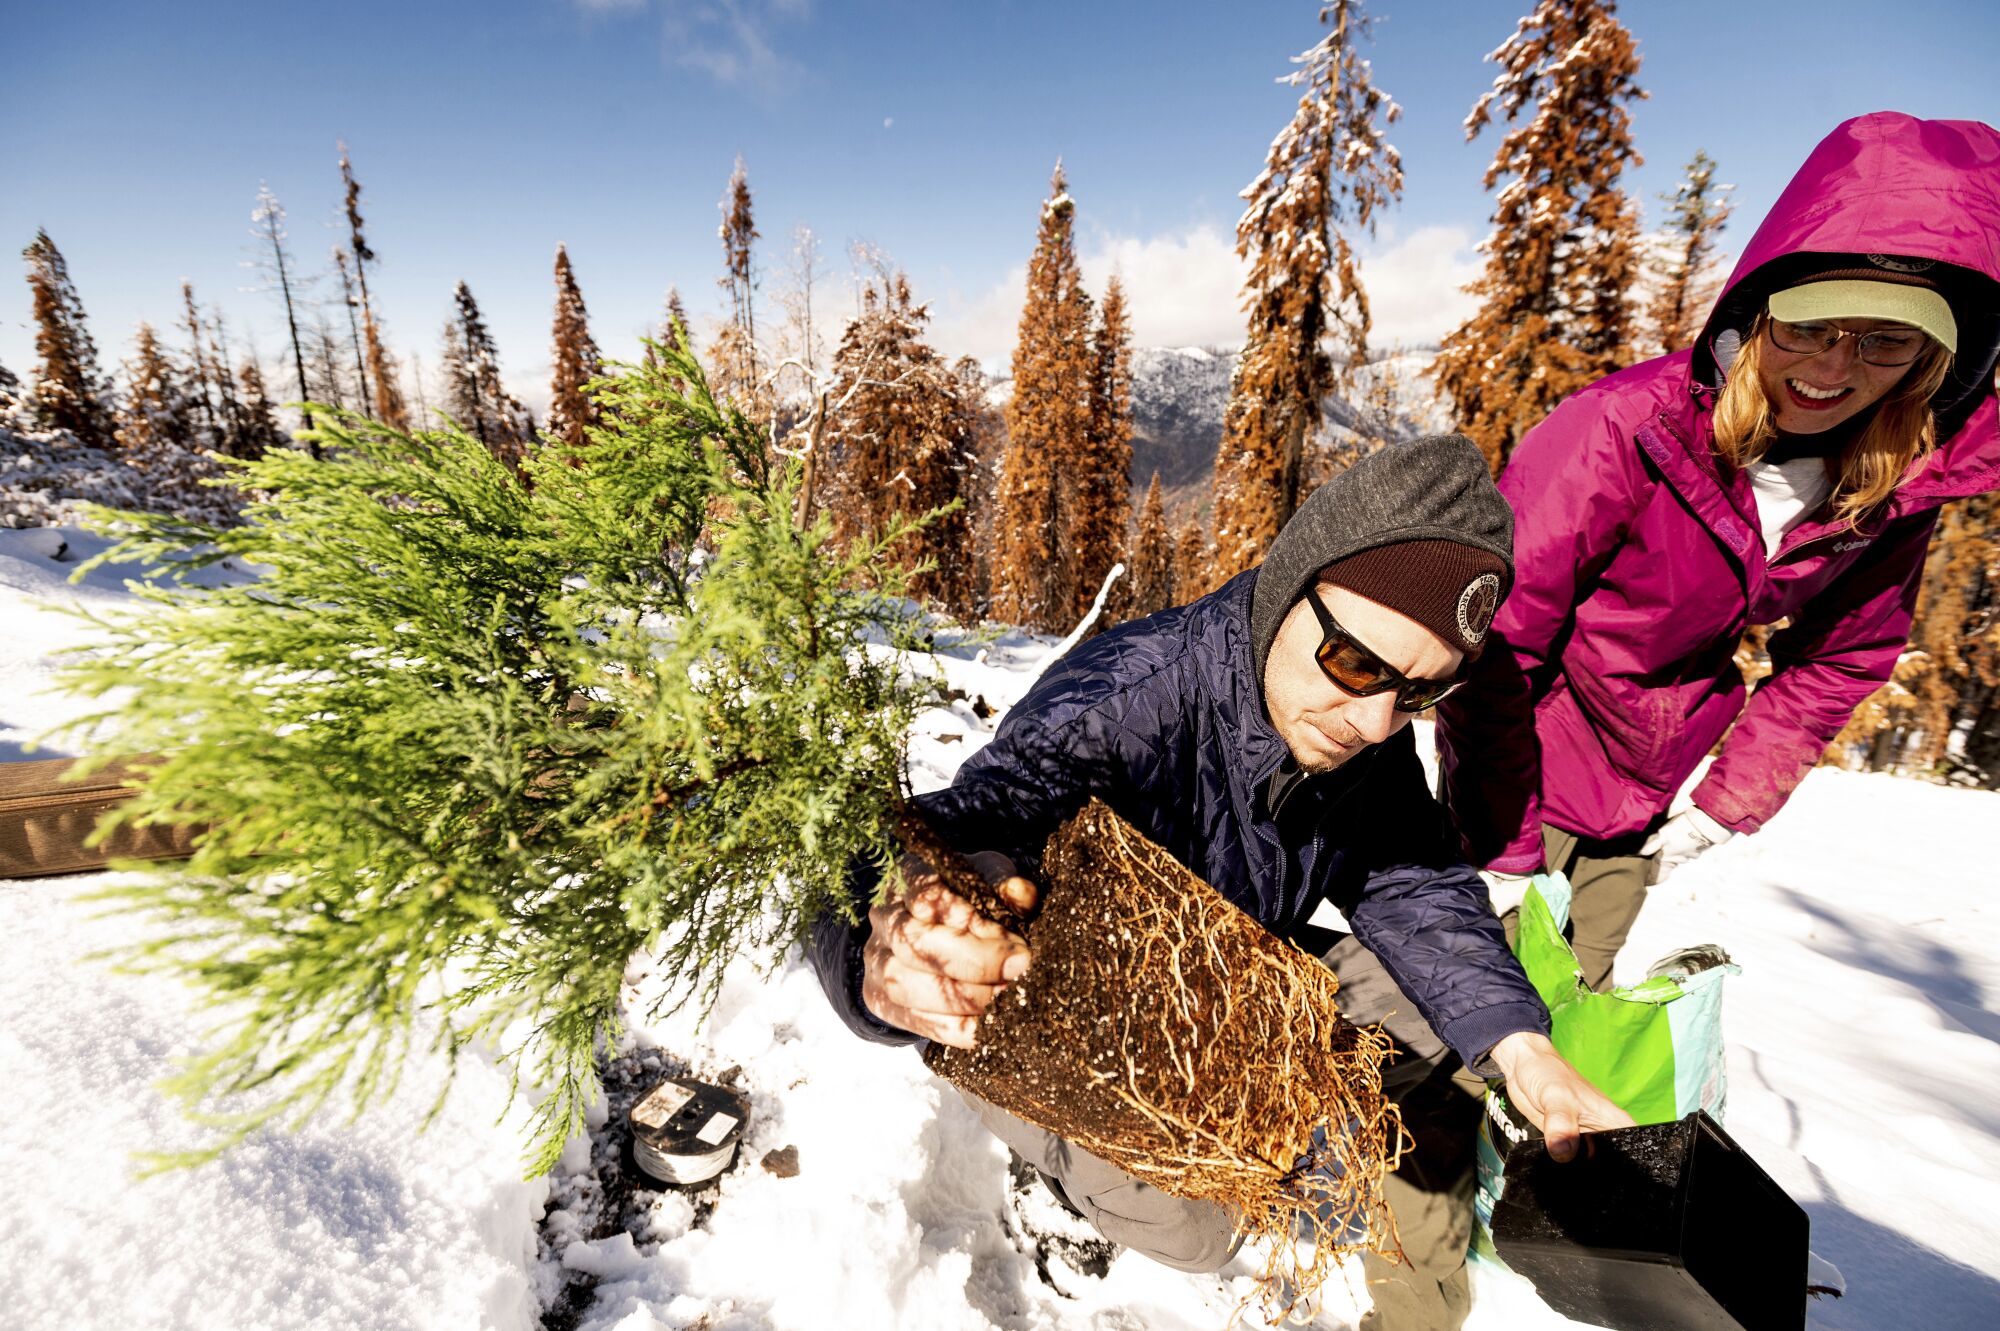 Tom Wall and Rachel Leitz wear jackets and plant a tree in snow-covered earth